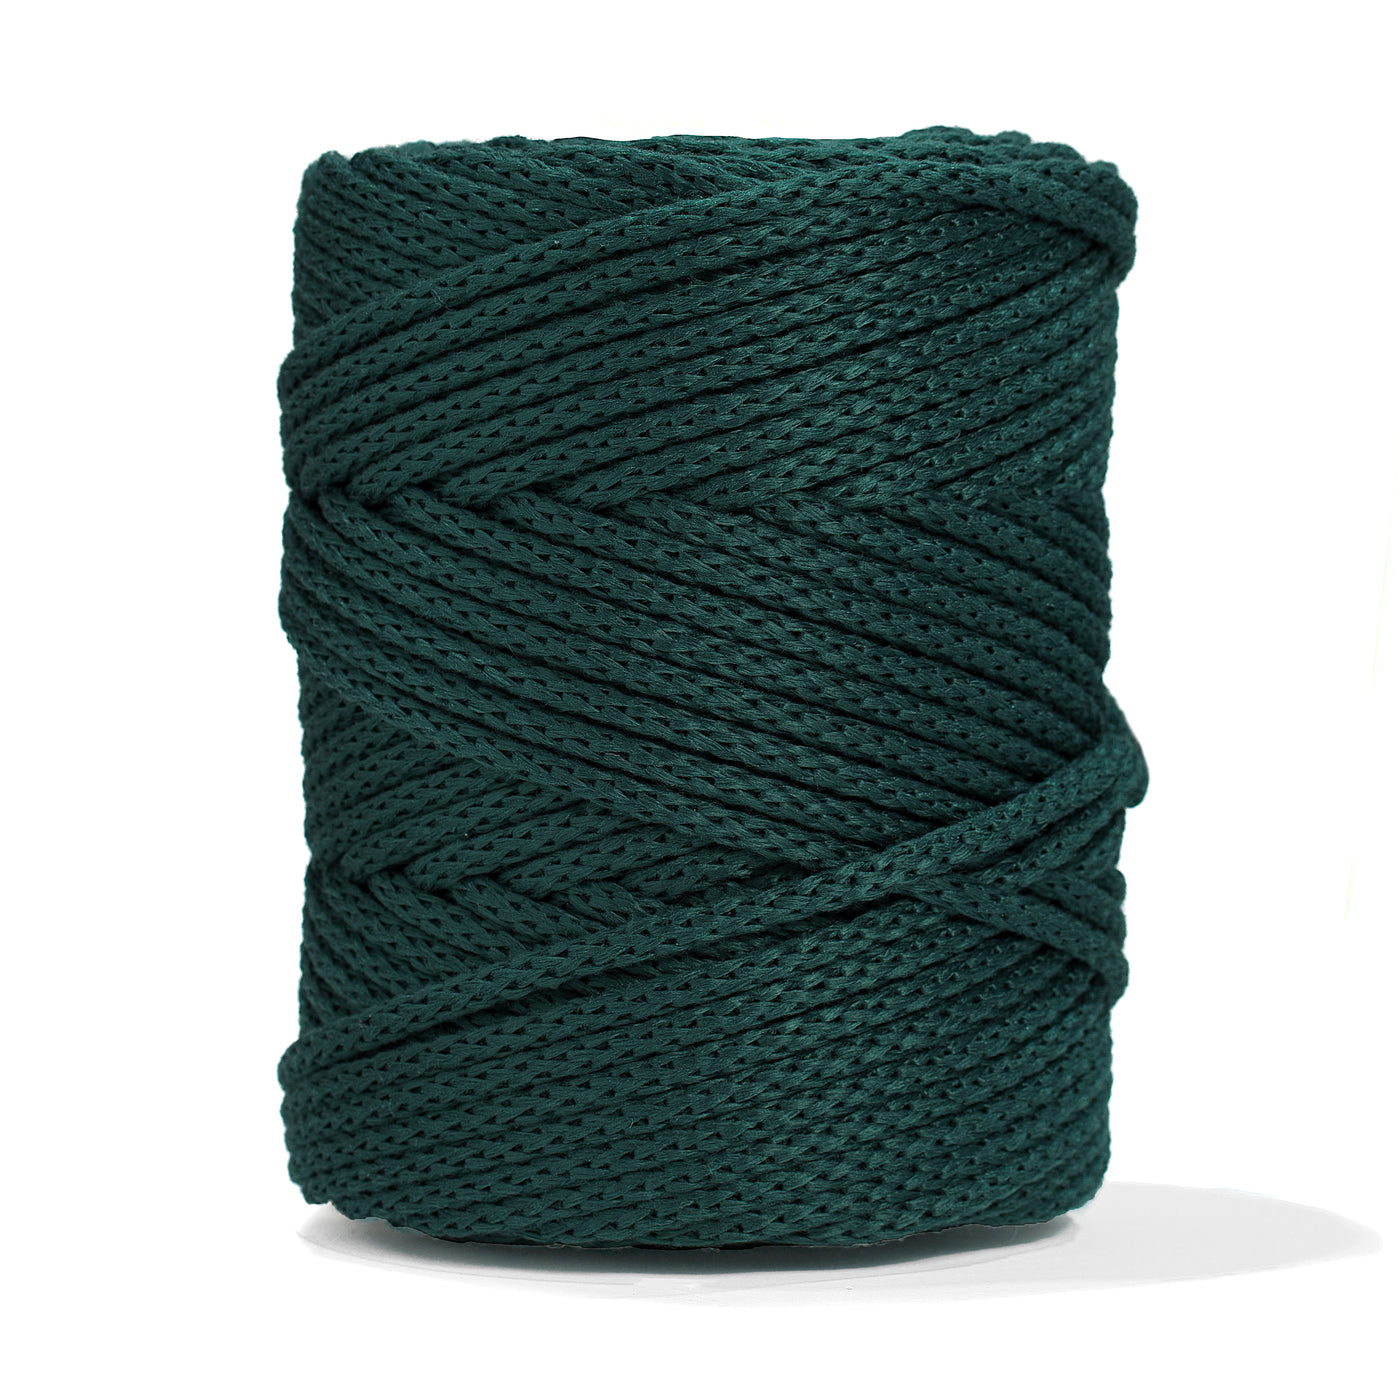 OUTDOOR RECYCLED BRAIDED CORD 6 MM -  FOREST GREEN COLOR